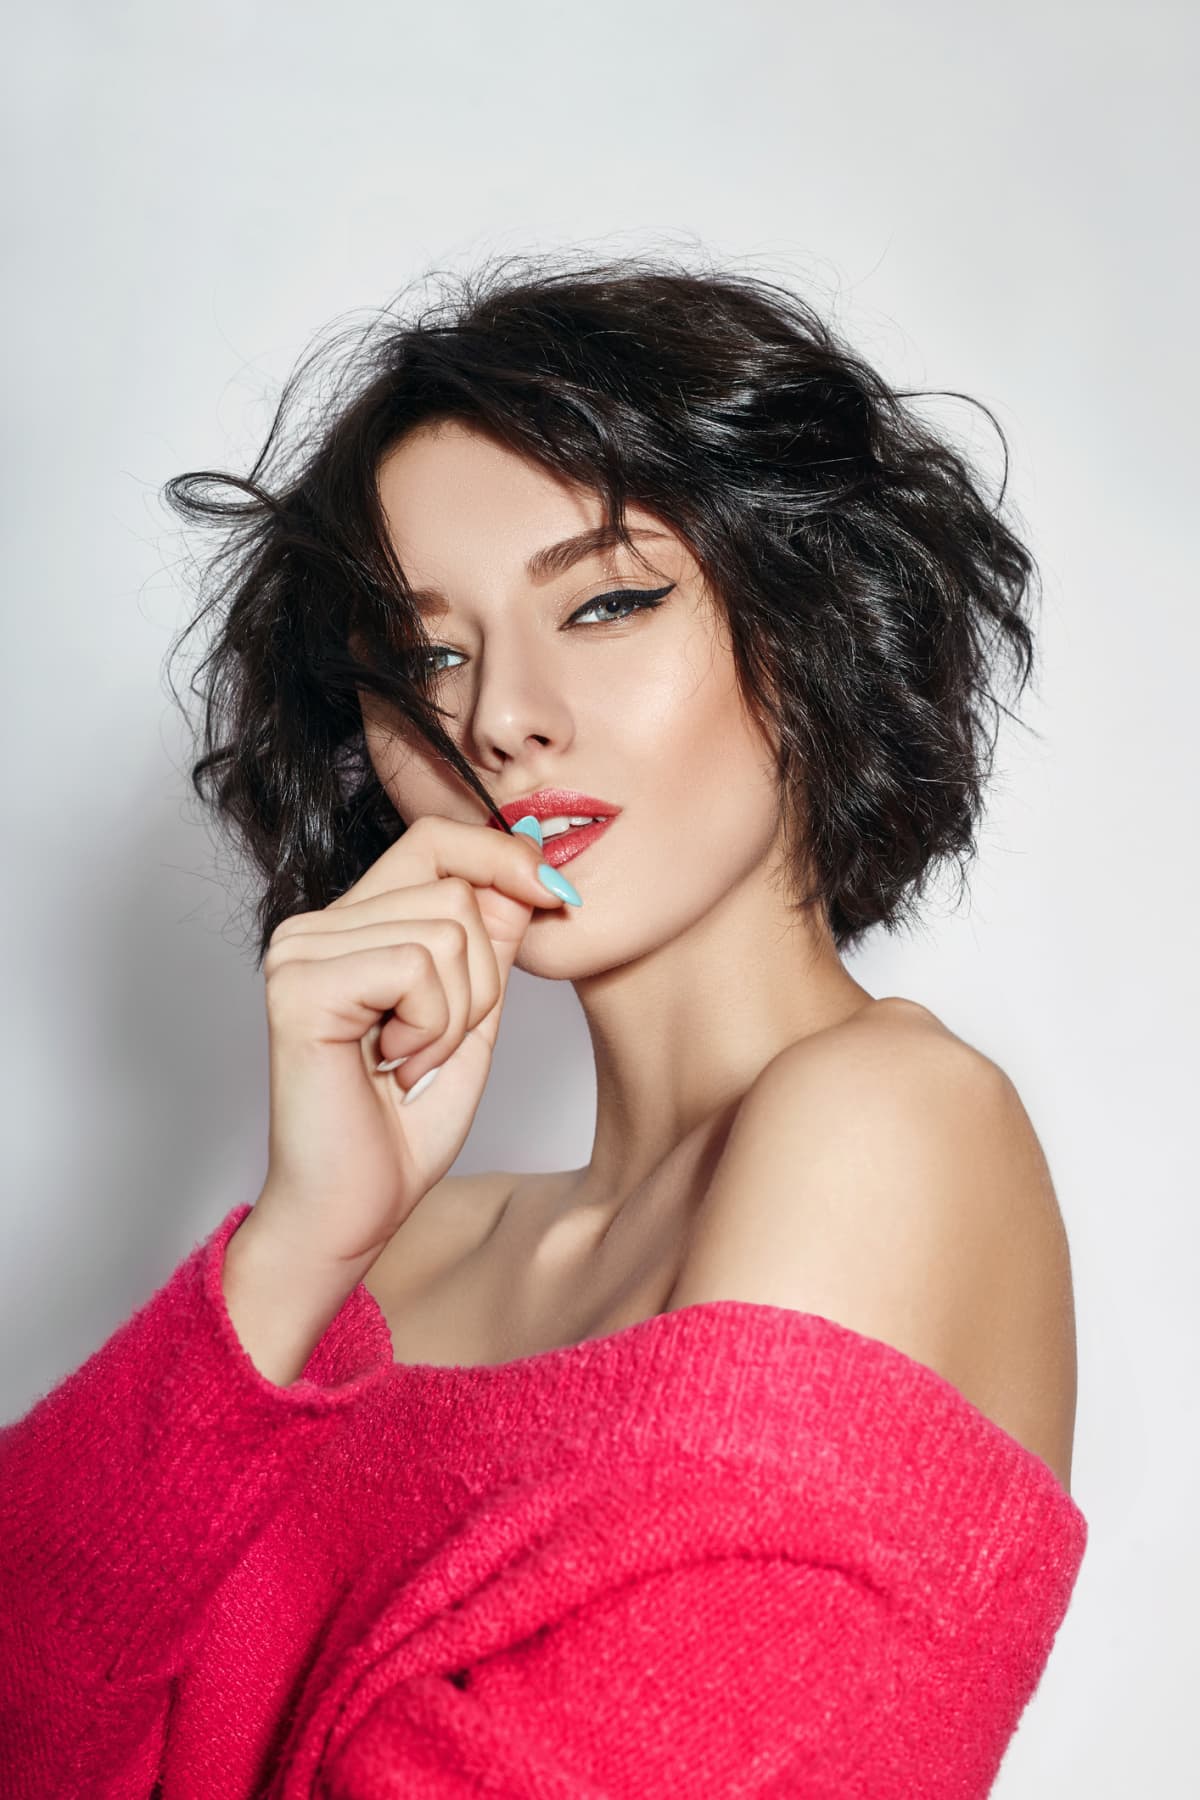 woman with short hair wearing a red sweater